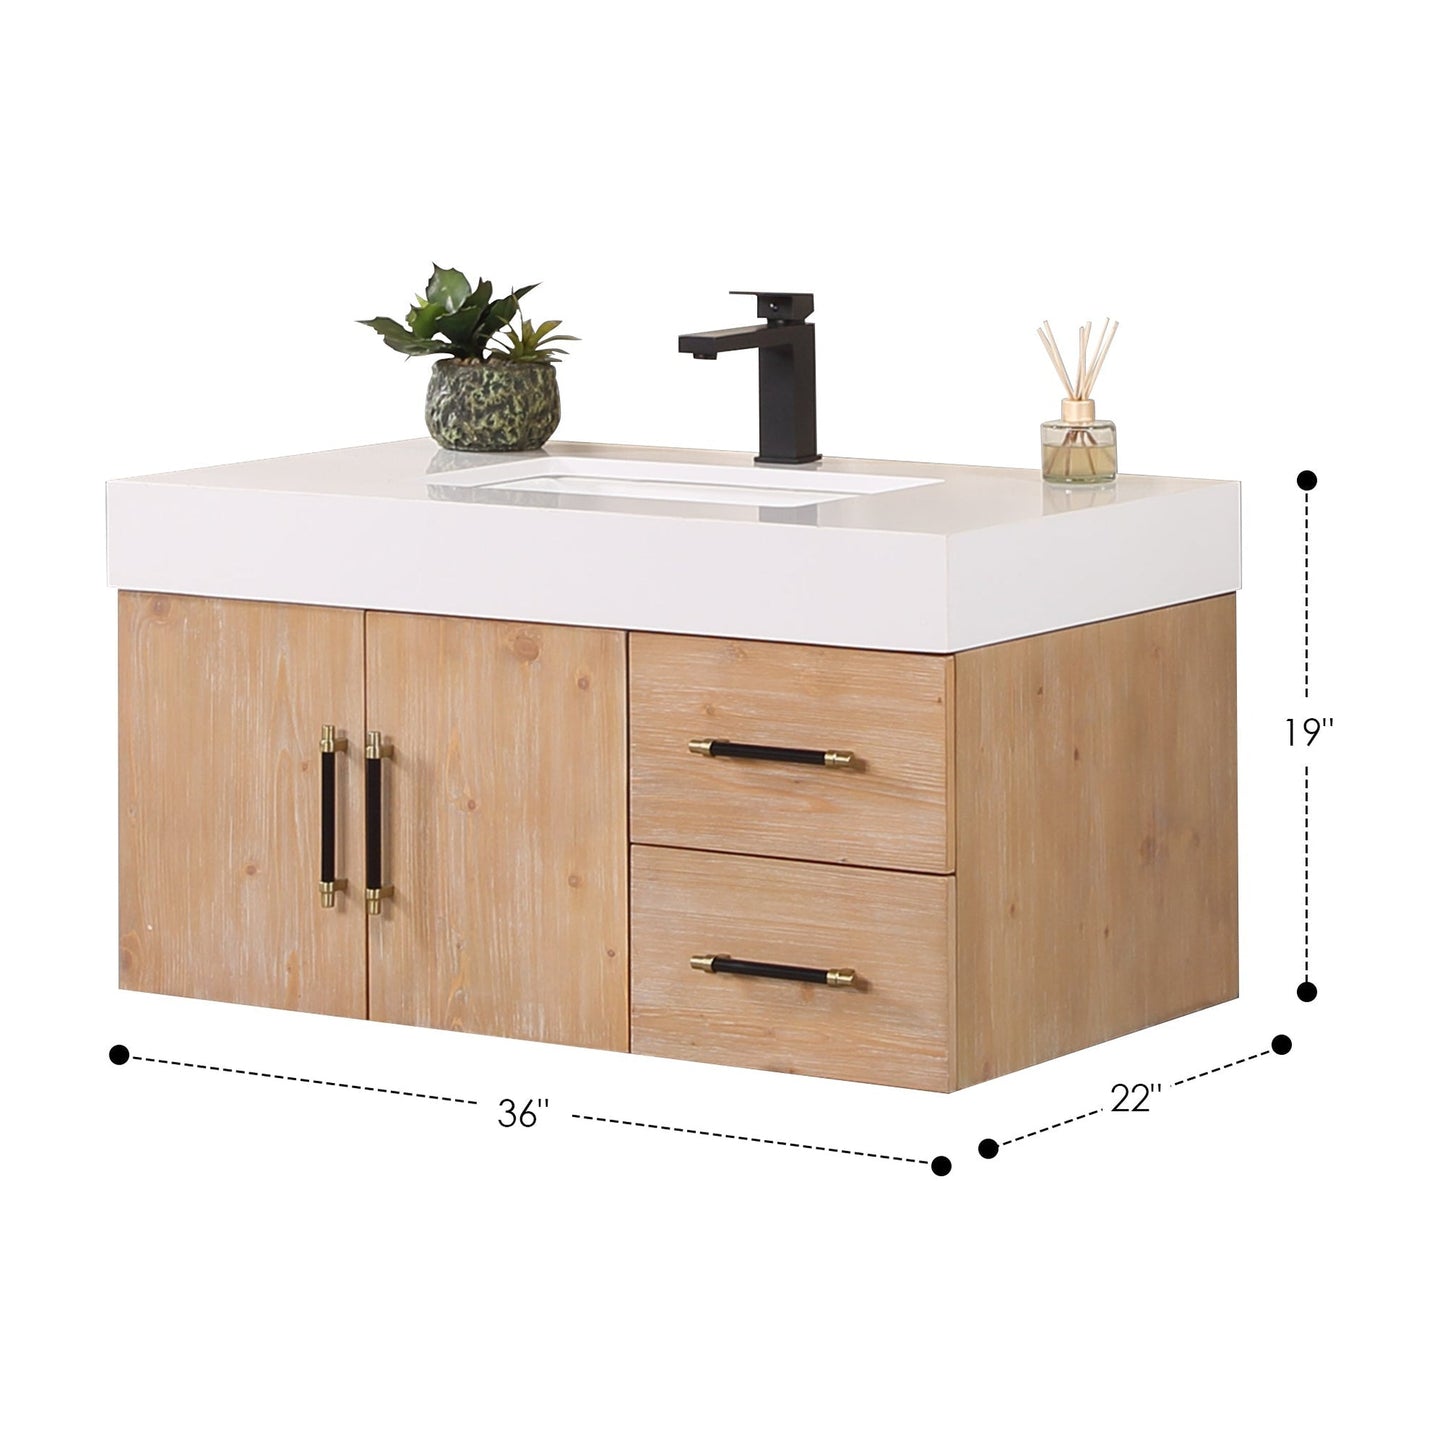 Altair Corchia 36" Light Brown Wall-Mounted Single Bathroom Vanity Set With Mirror, White Composite Stone Top, Single Rectangular Undermount Ceramic Sink, and Overflow